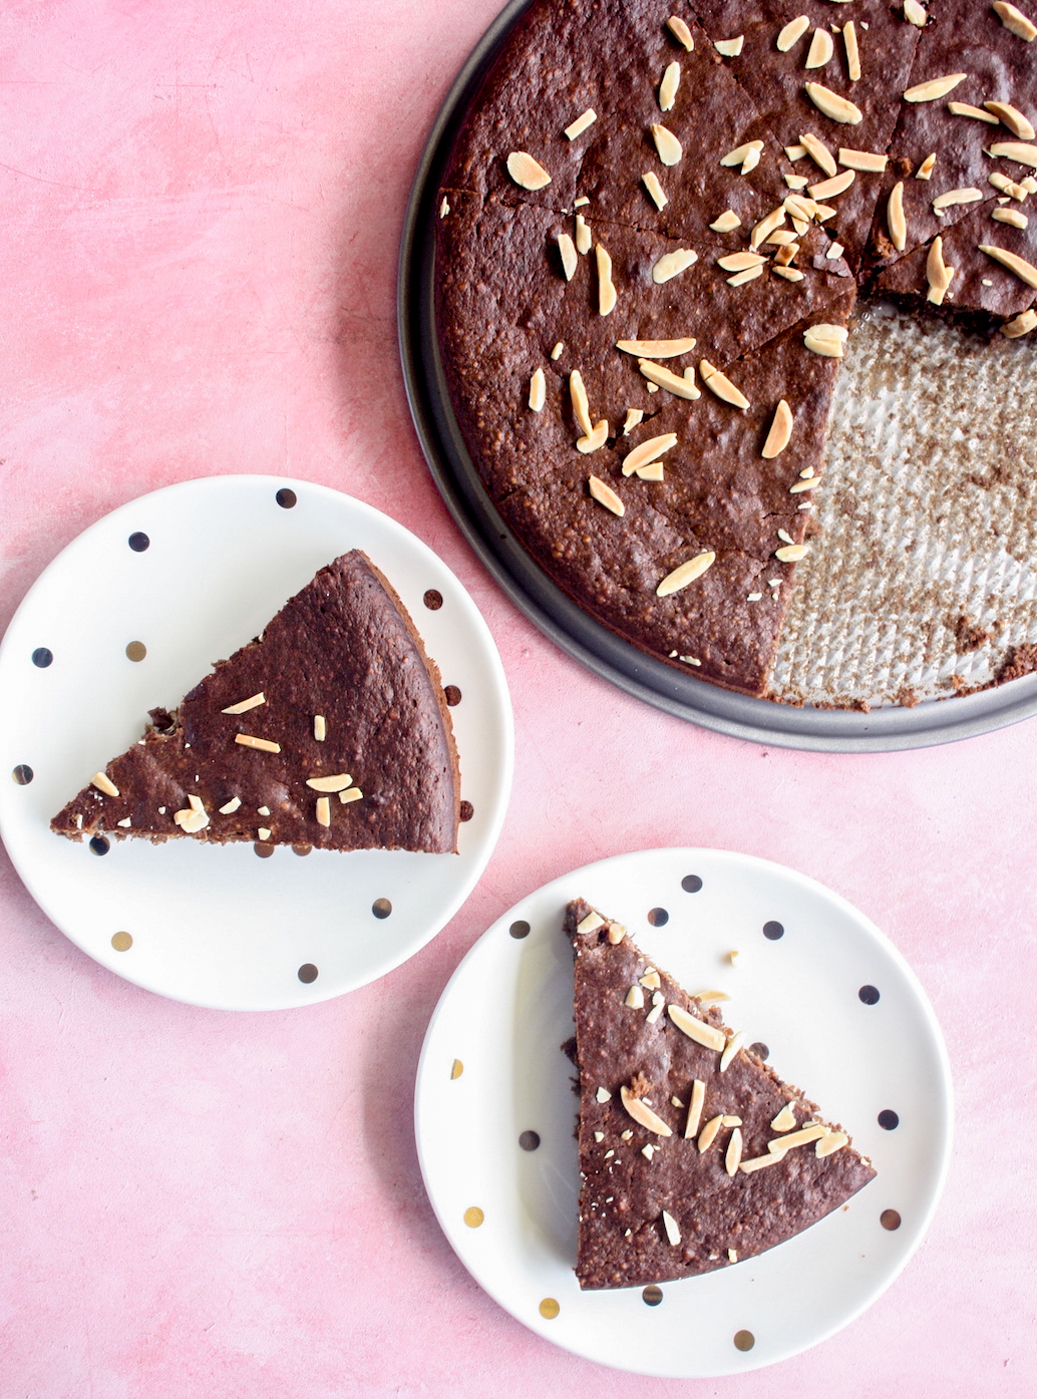 Naturally sweetened fudgy chocolate cake with almonds and bananas